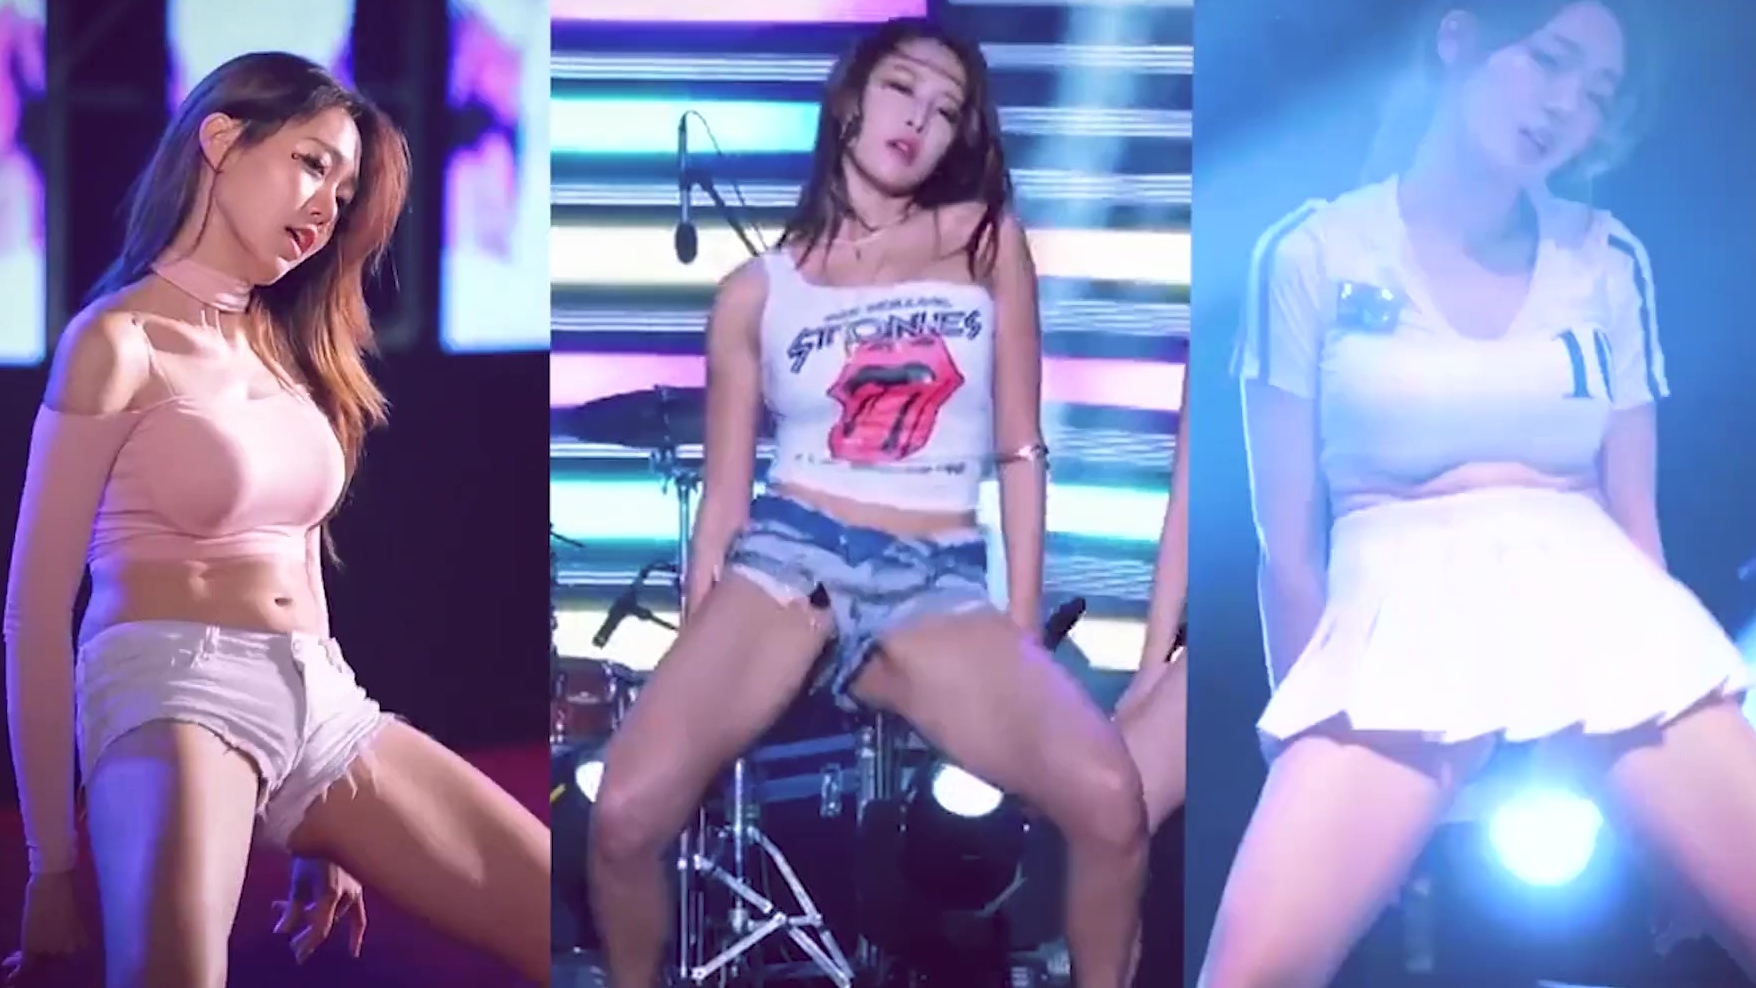 Dancing Girls teasing with Fit Bodies in Mixed K-Pop PMV Compilation image pic